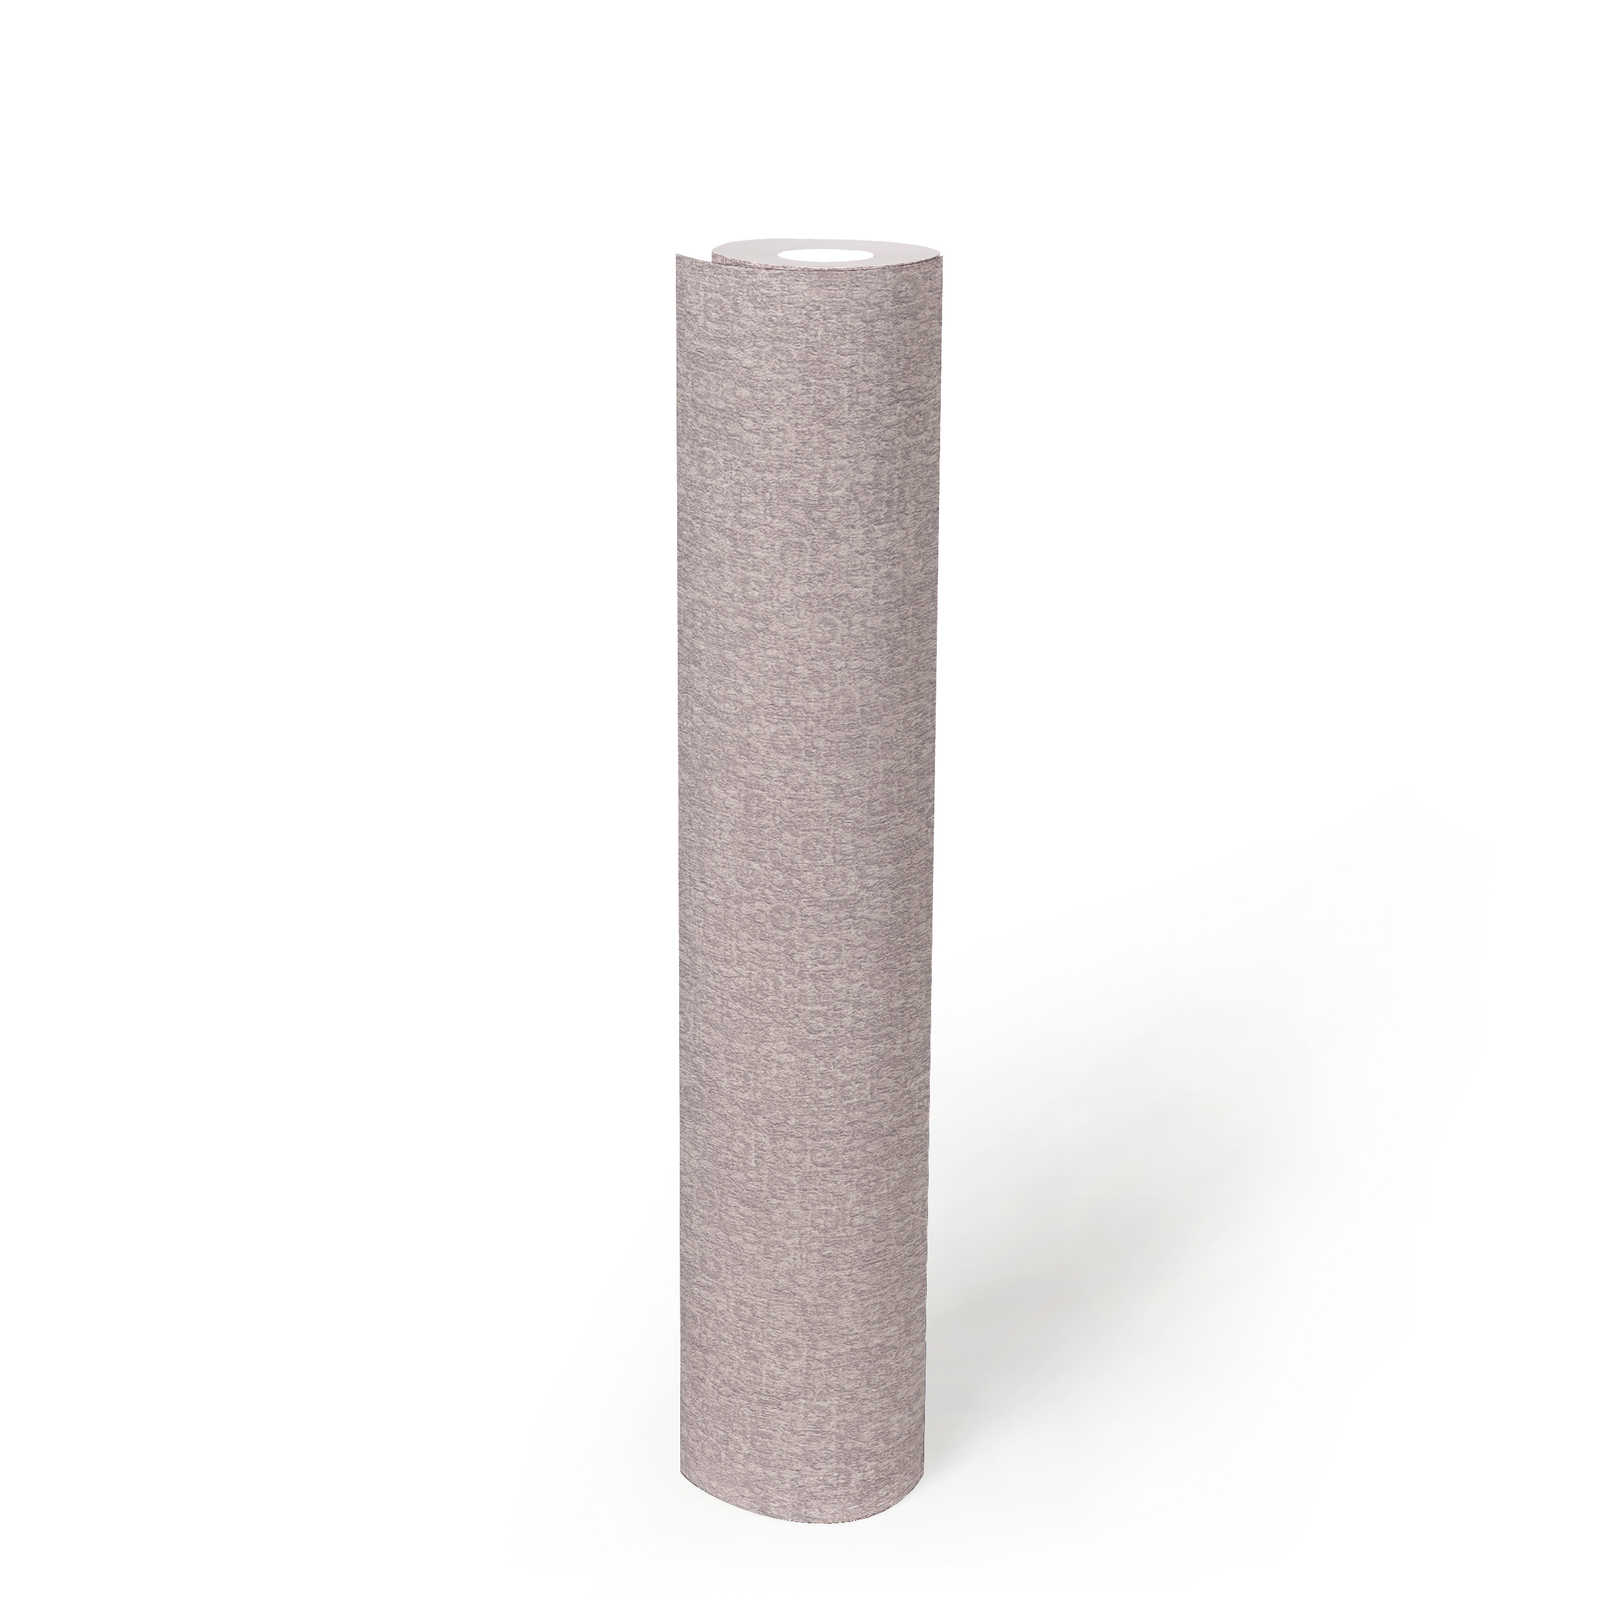             Non-woven wallpaper pink with texture effect & textile opics
        